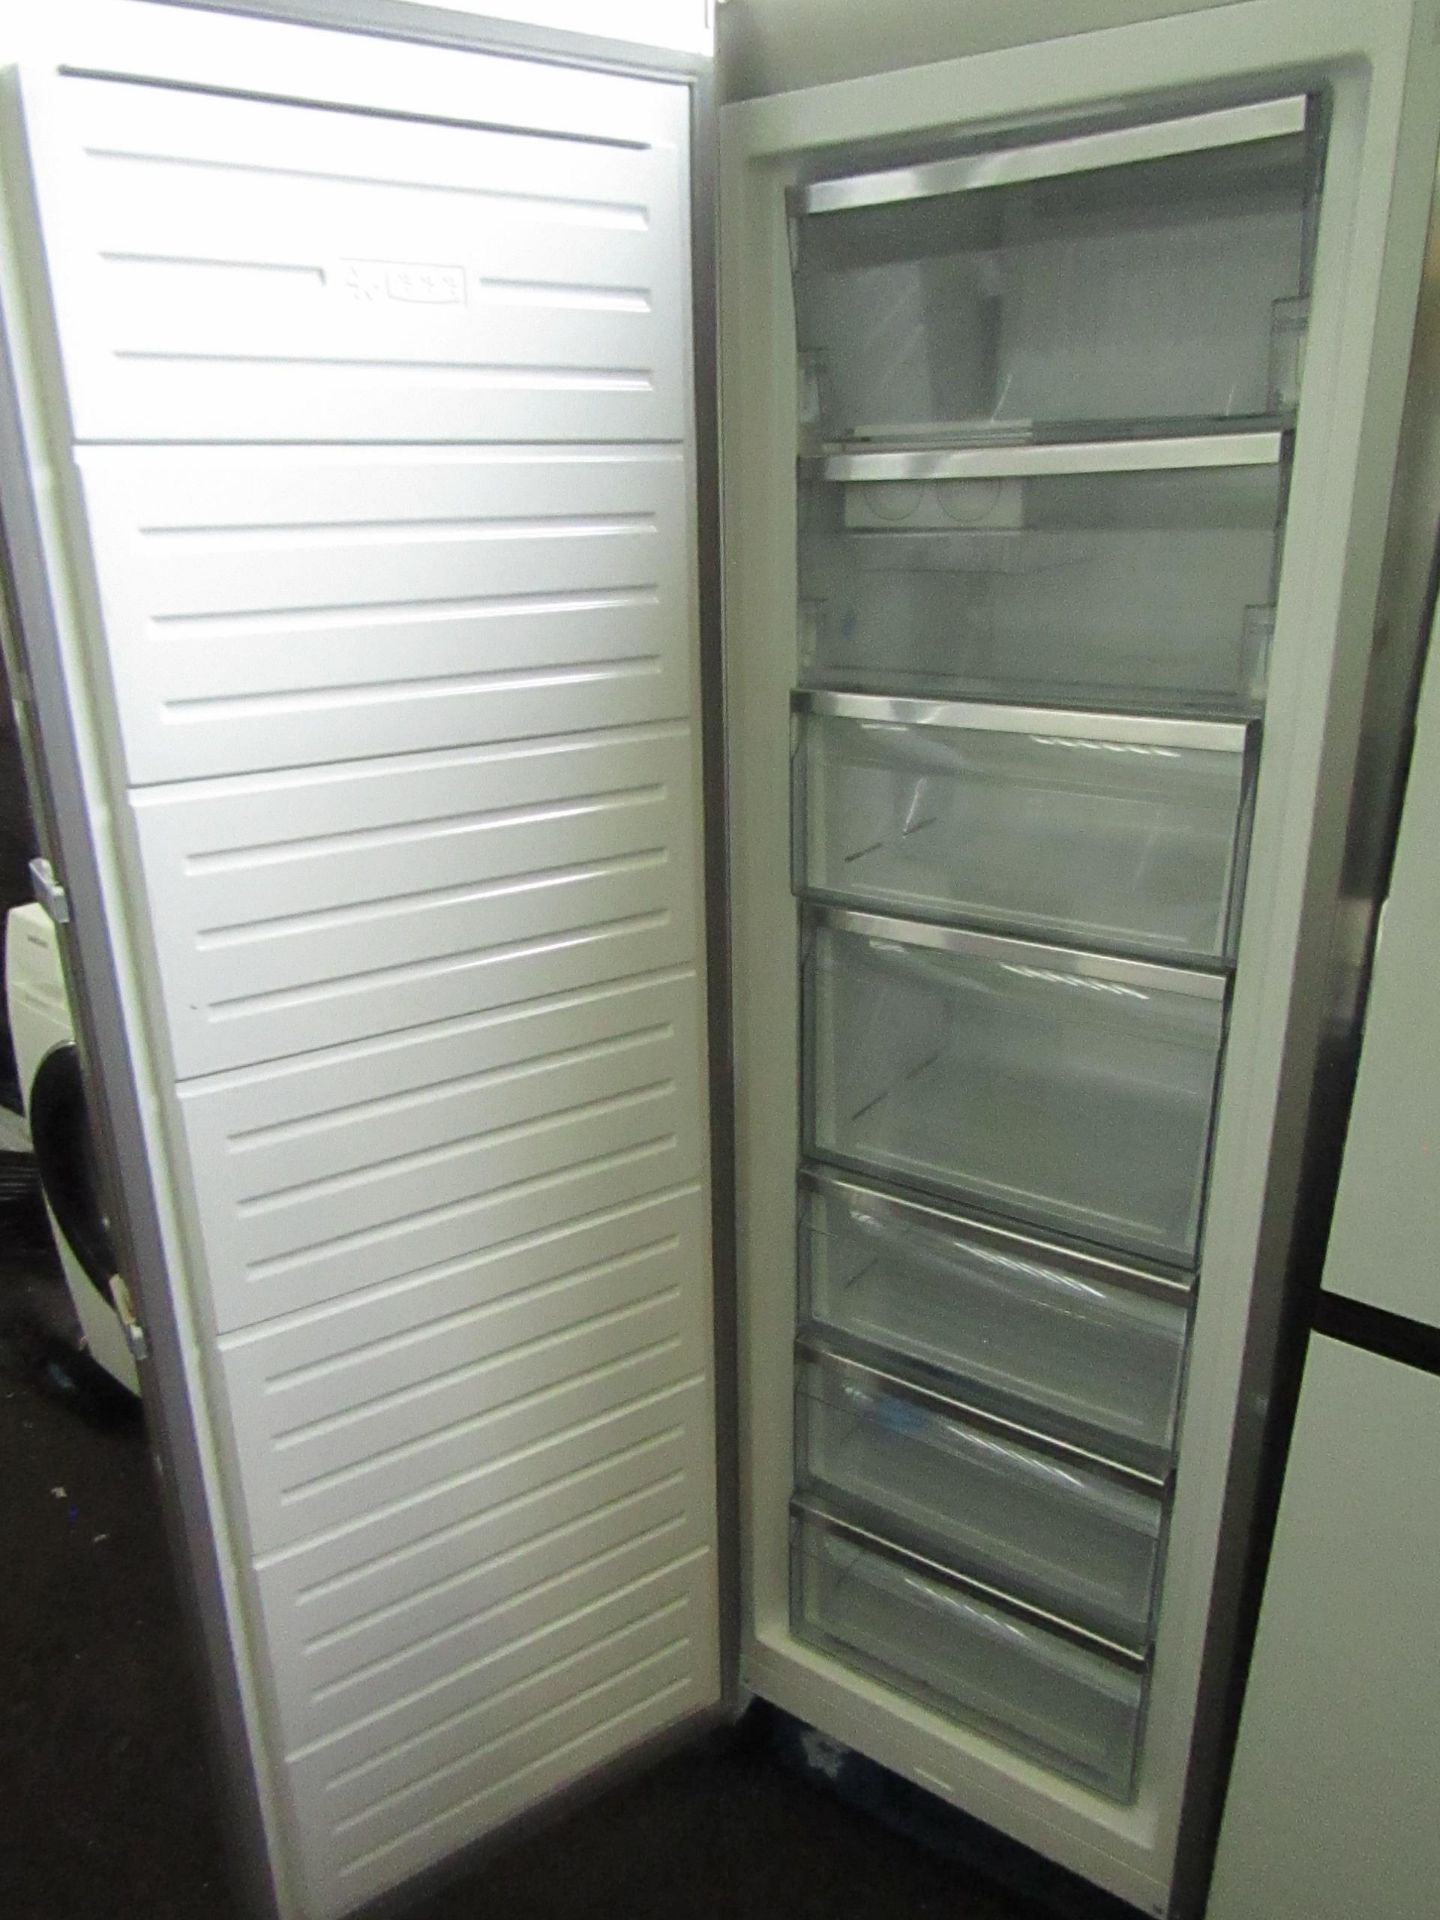 Sharp tall freestanding Freezer, Powers on but not getting cold - Image 2 of 2